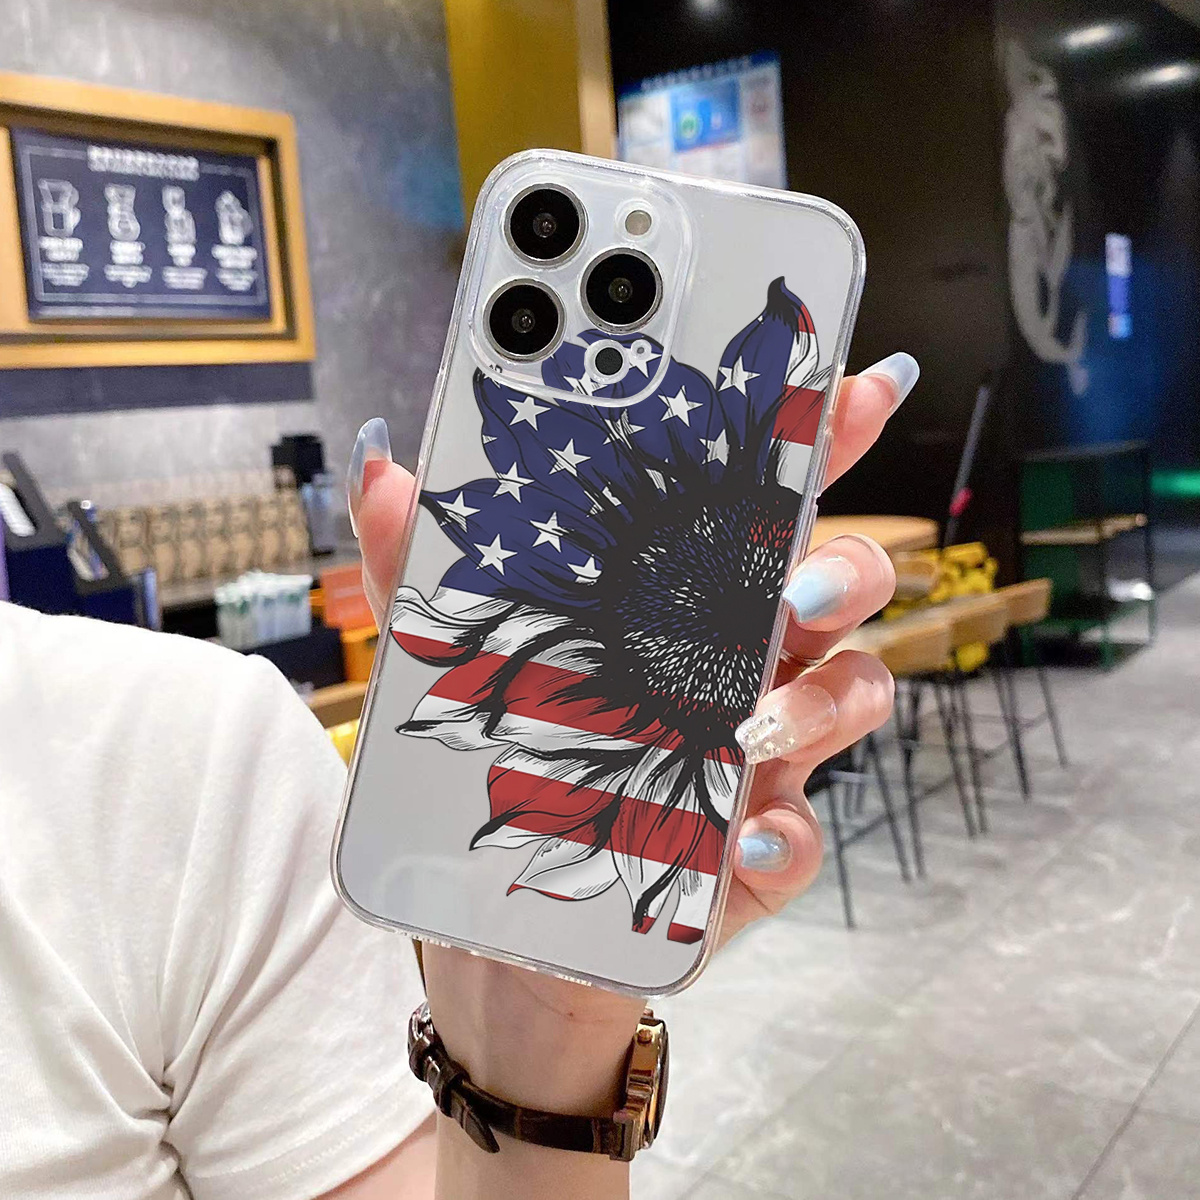 

Sunflower Flag Graphic Protective Phone Case For 11/12/13/14/12 Pro Max/11 Pro/14 Pro/15/xs Max/x/xr/7/8/8 Plus, Gift For Birthday, Girlfriend, Boyfriend